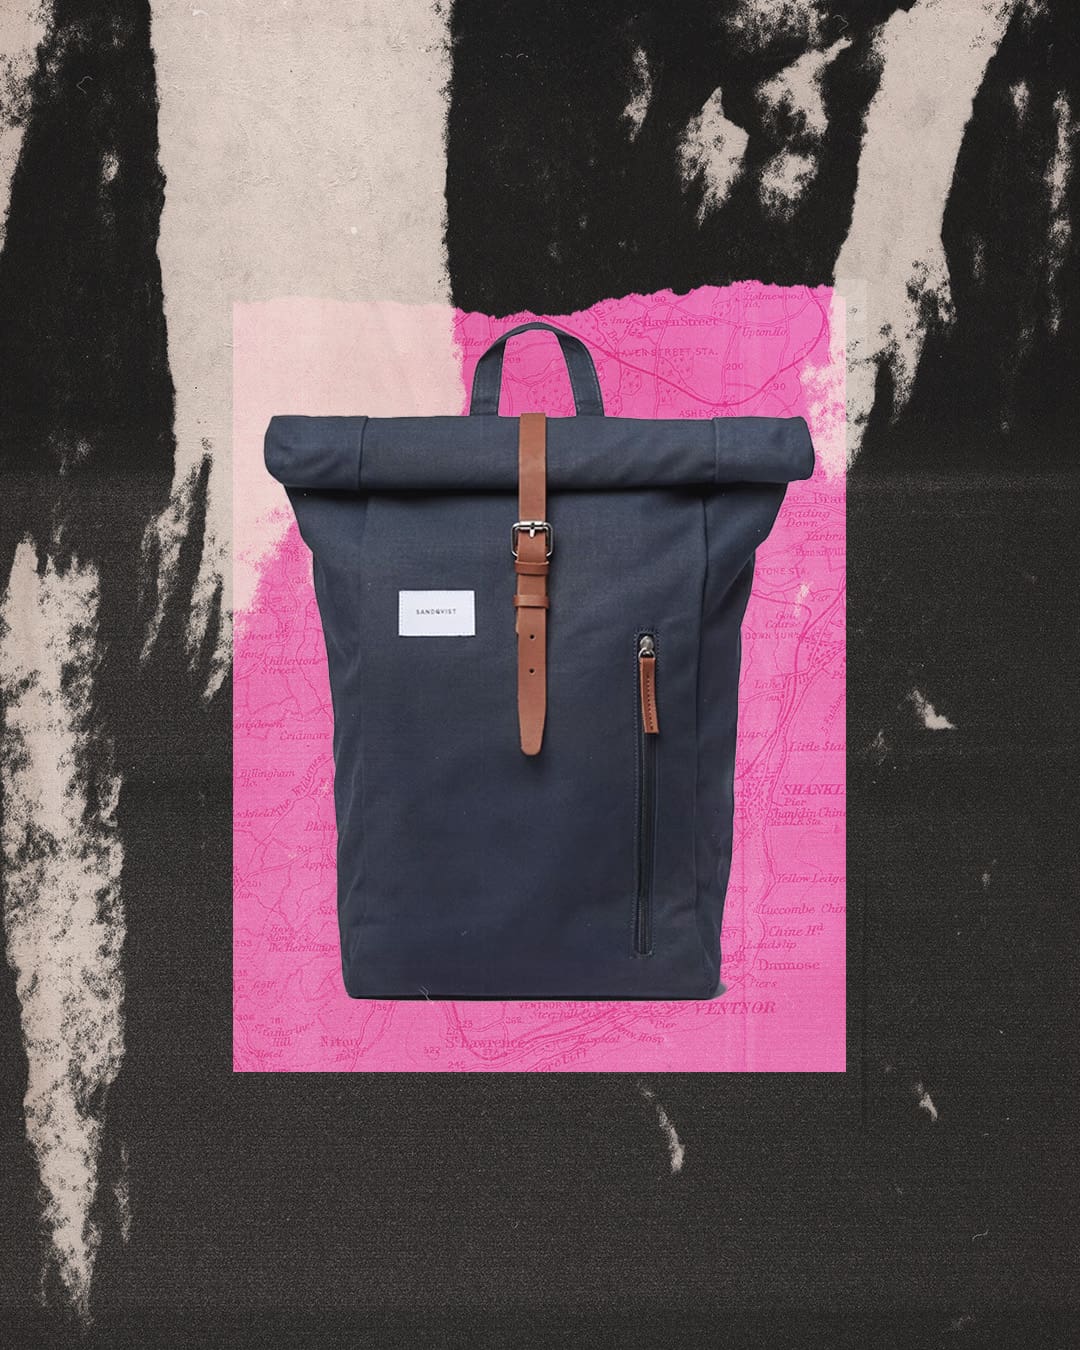 The best luggage and backpacks | Dante rolltop backpack by Sandqvist,